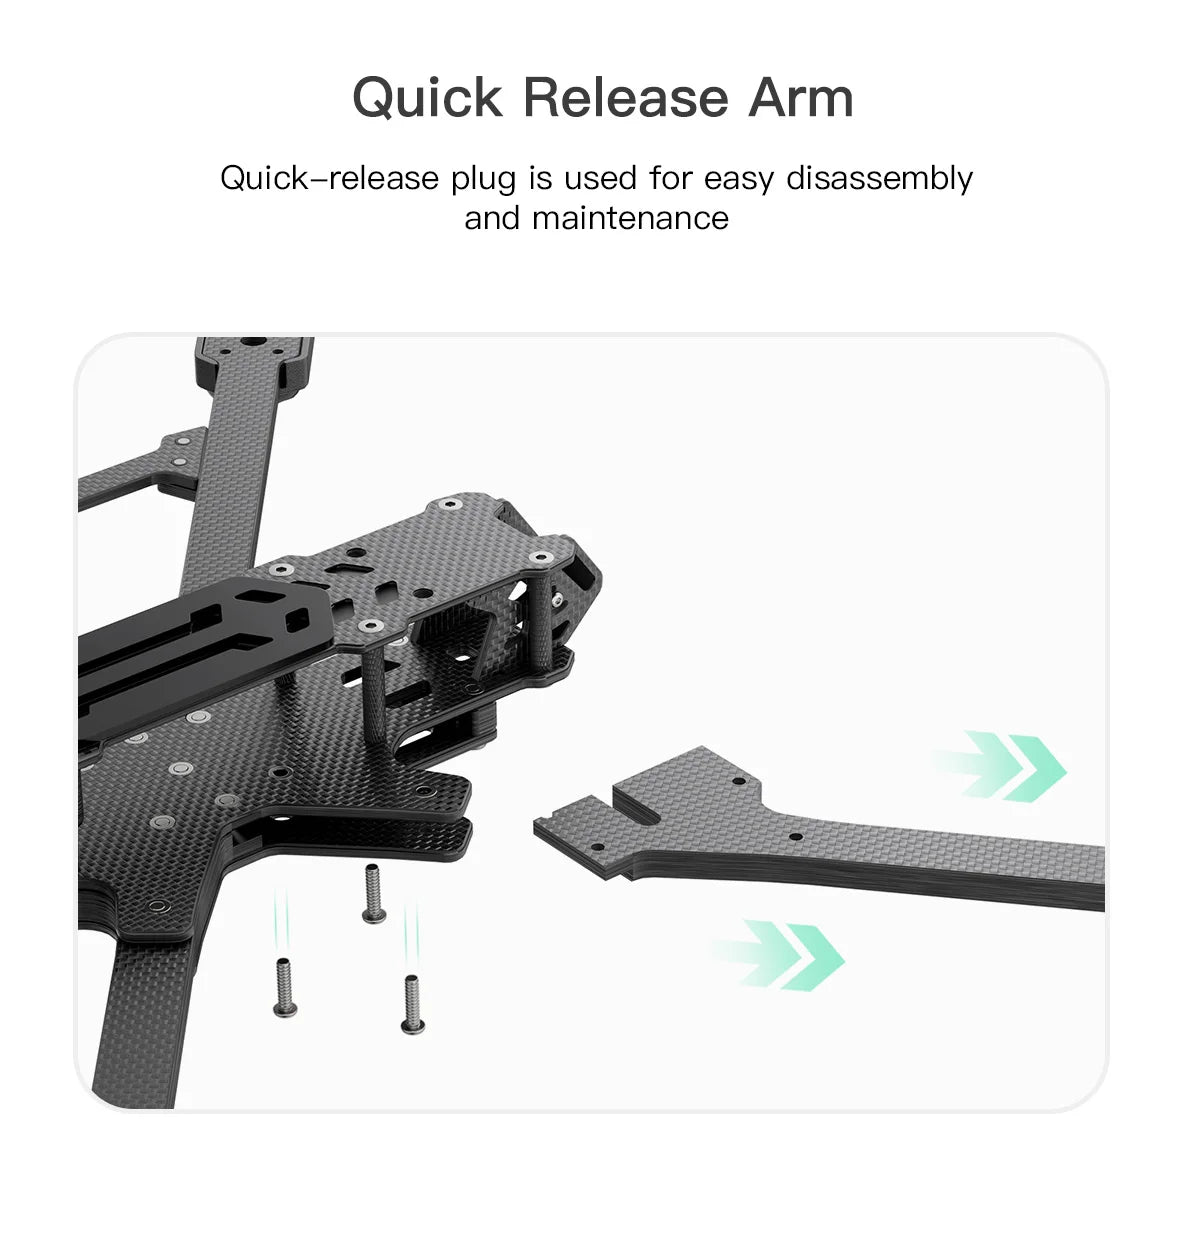 GEPRC GEP-EF10 Frame Parts, Quick Release Arm Quick-release arm is used for easy disassembly and